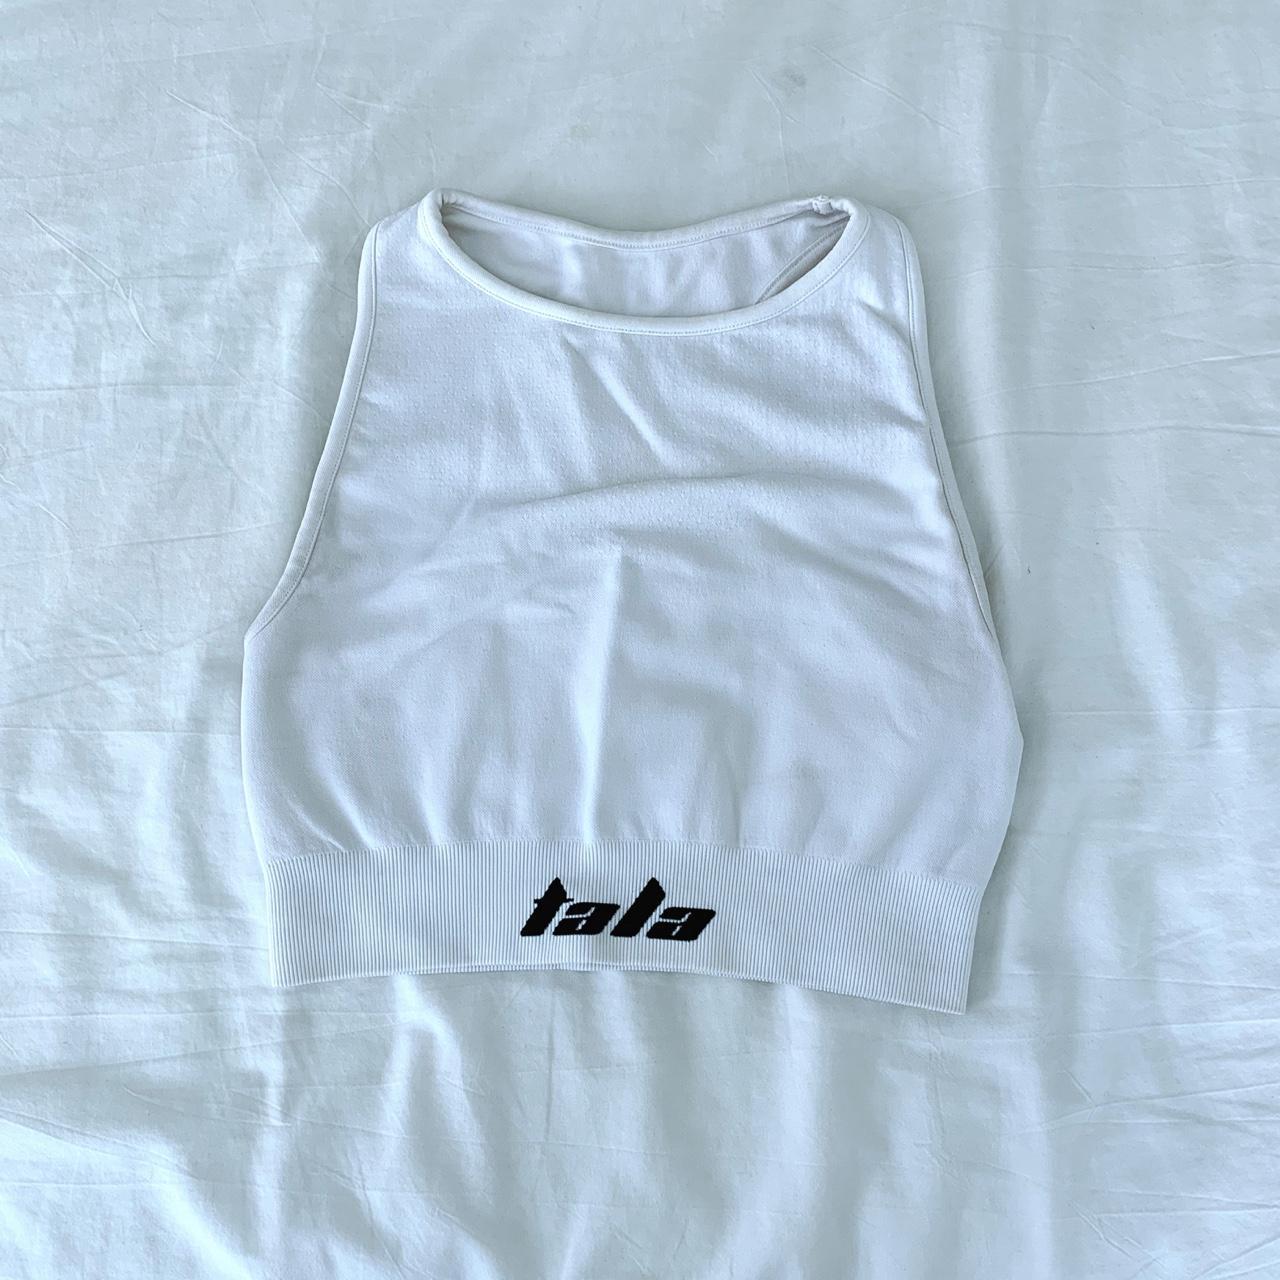 Product Image 1 - TALA HIGH NECK SPORTS BRA

Deadstock!